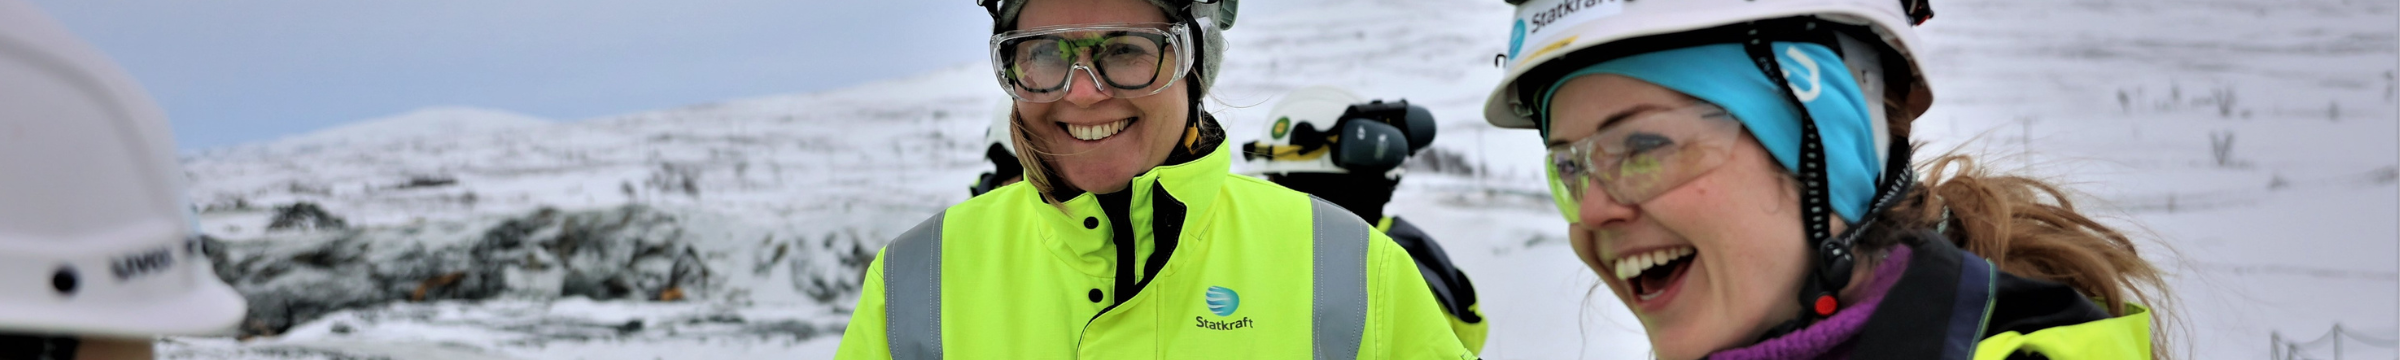 Two female Statkraft workers in PPE with snow mountain landscape in background 